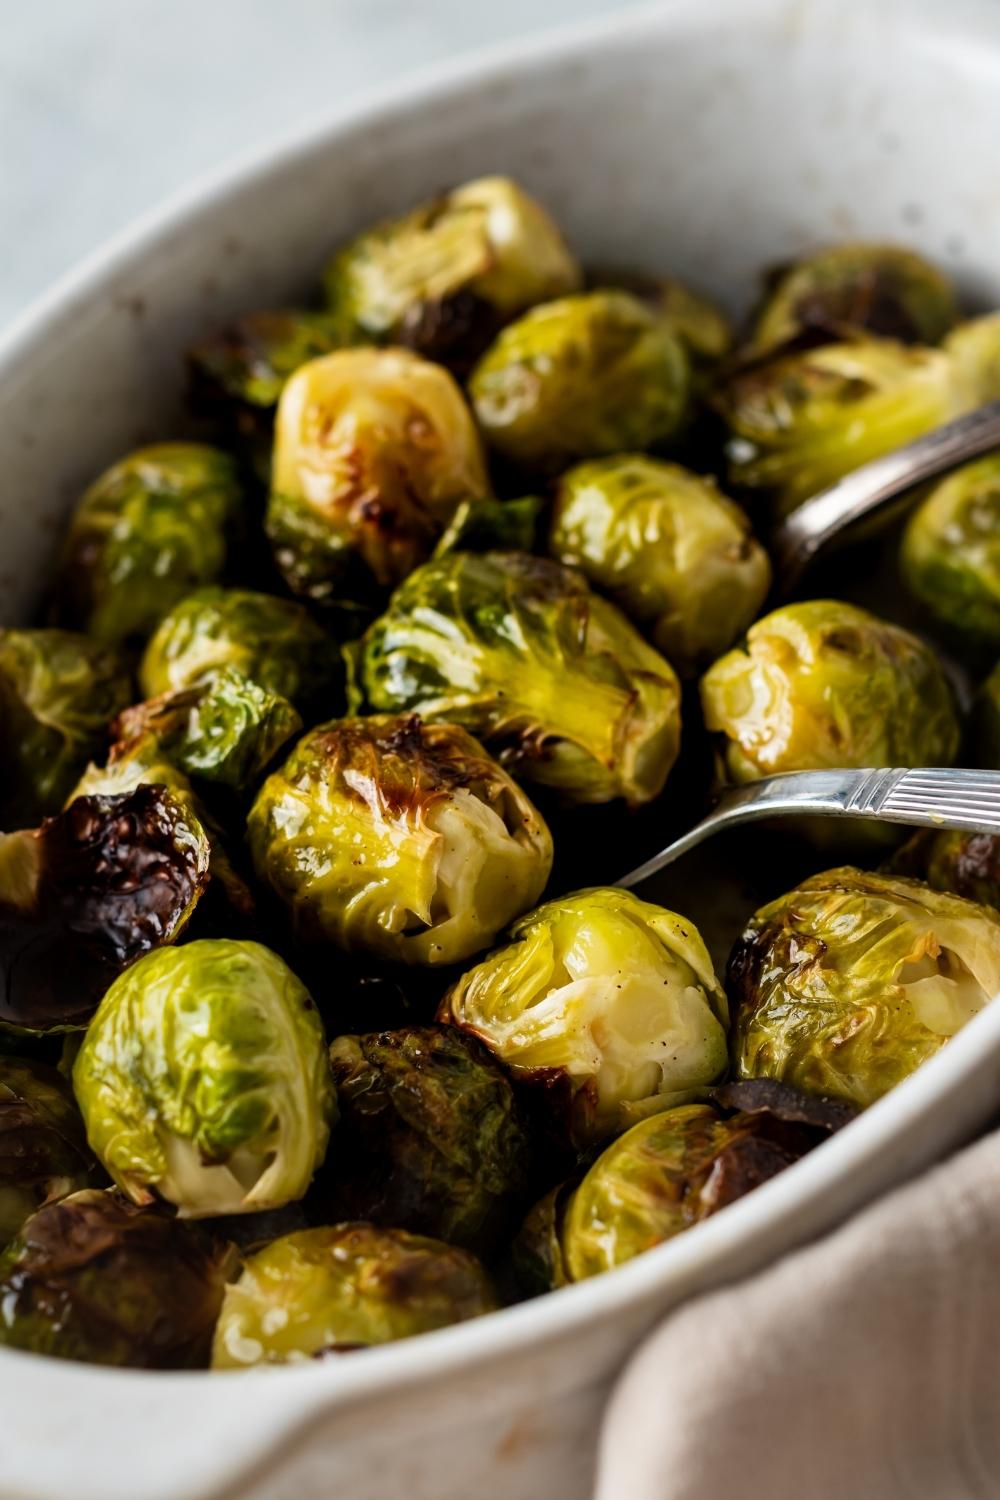 A casserole dish with cooked brussels sprouts. Two serving spoons sit in the dish.